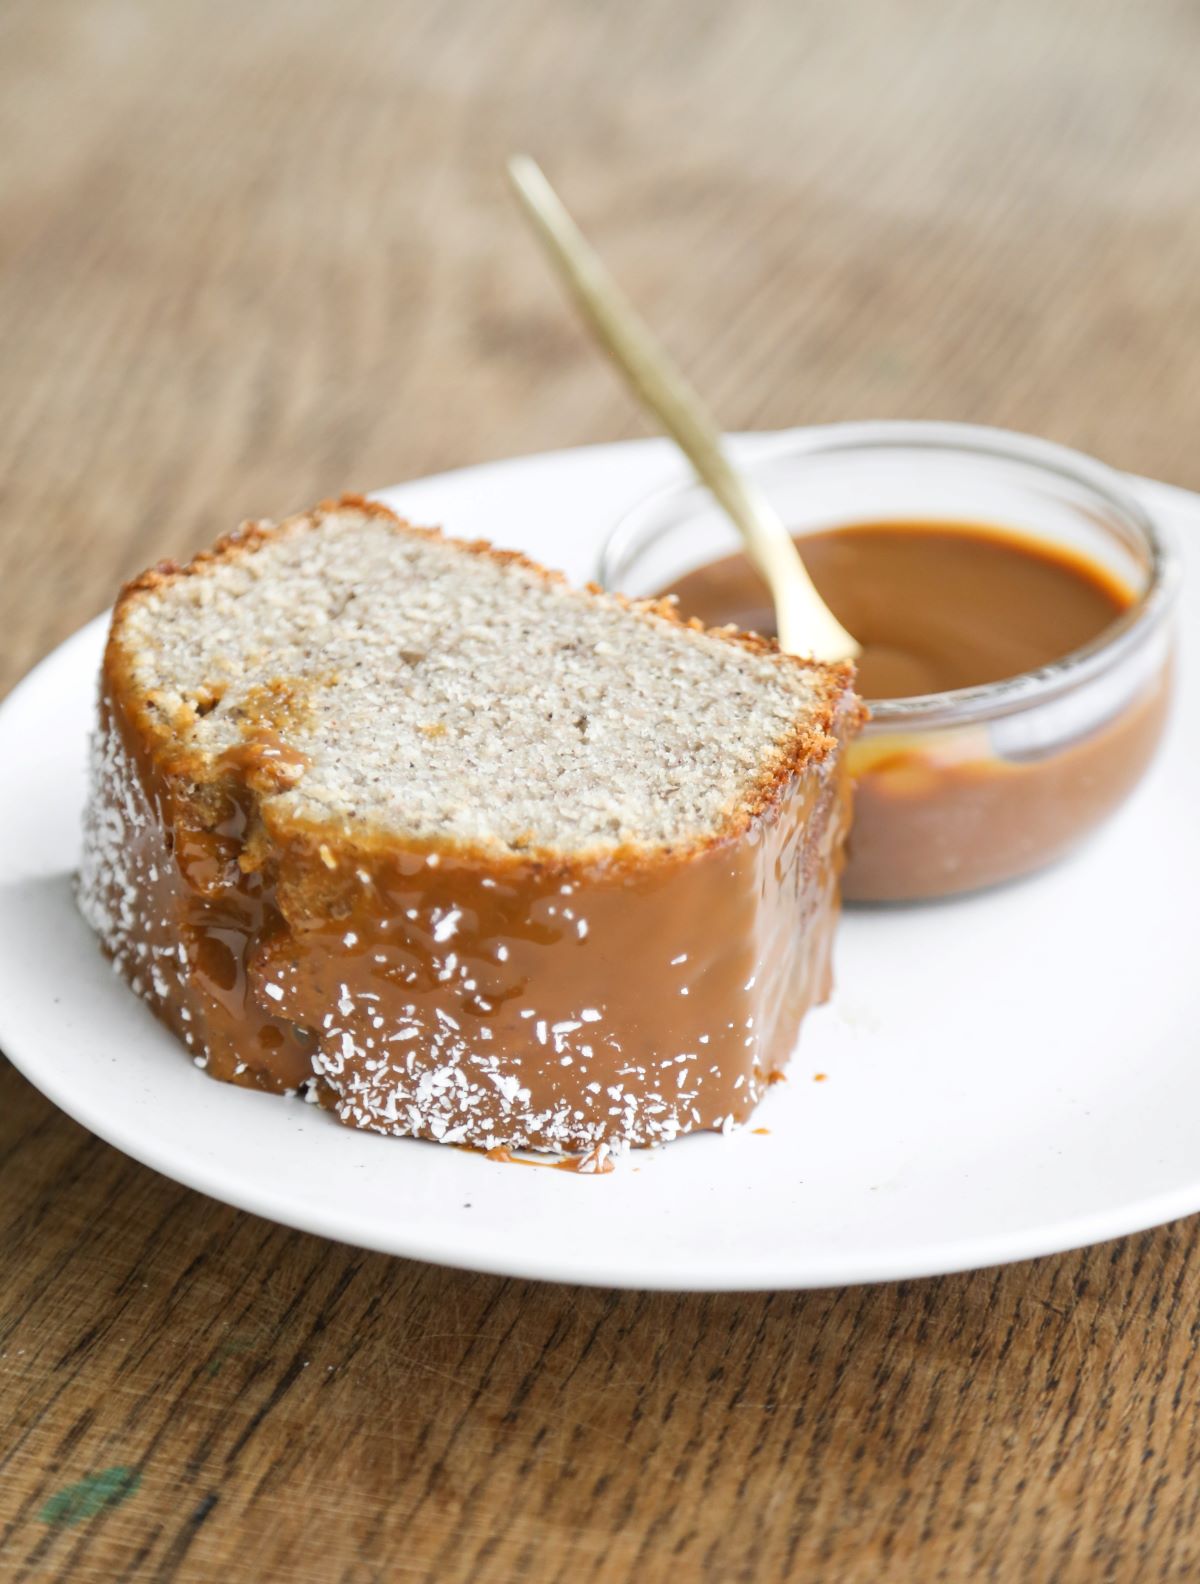 Slice of banana loaf cake with a dip of dulce de leche on a white plate on a wood surface.